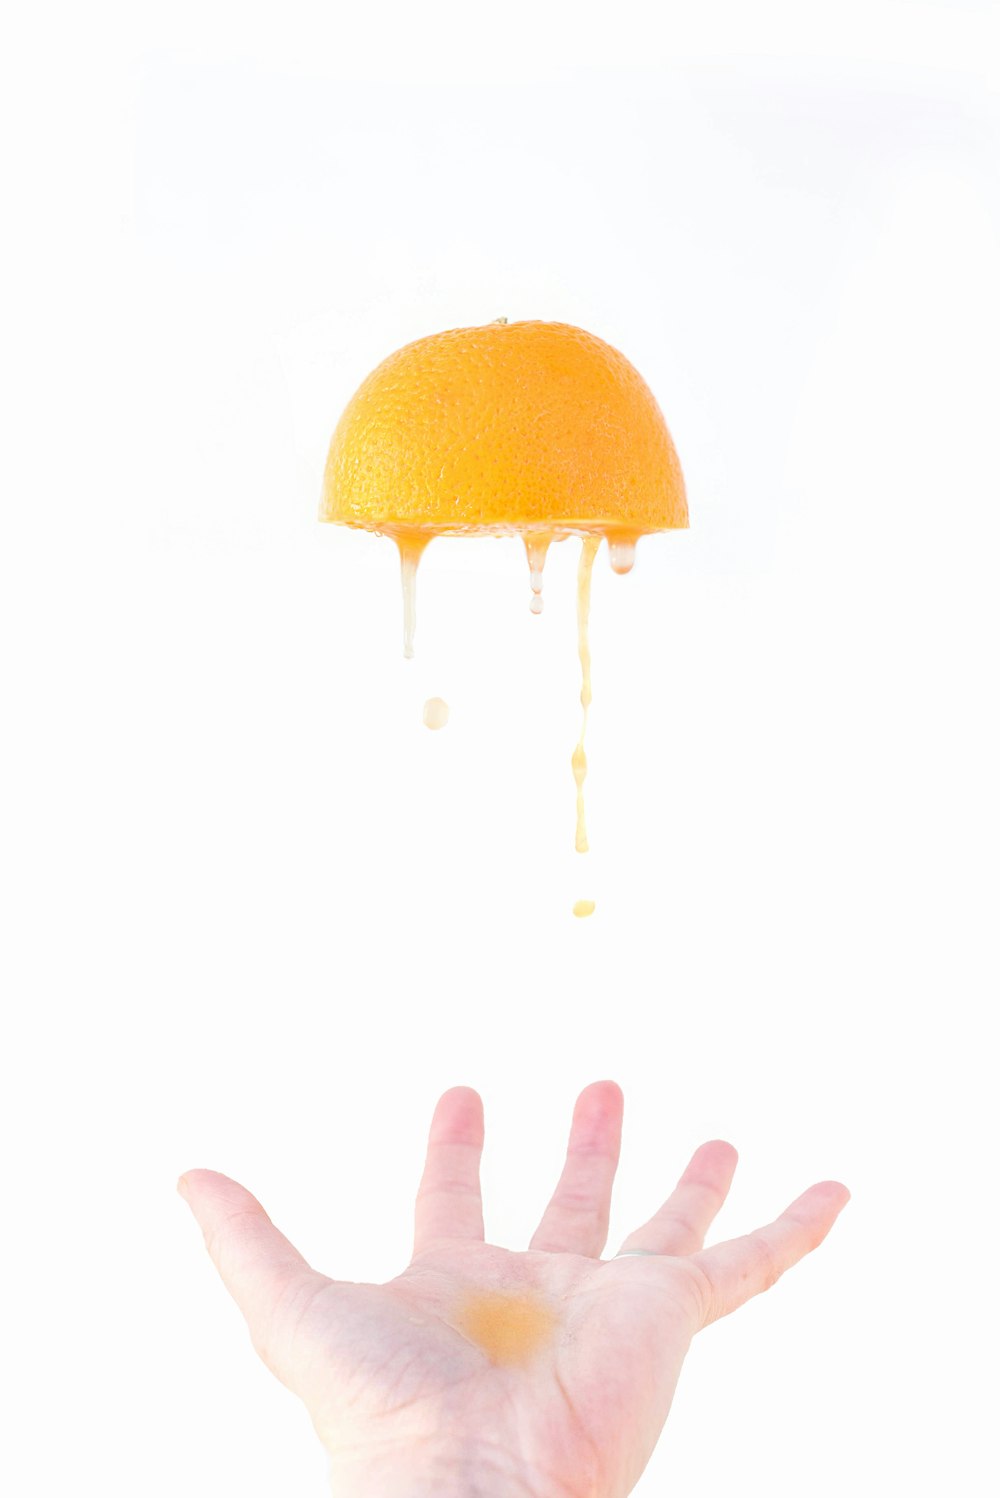 person holding orange fruit with water droplets